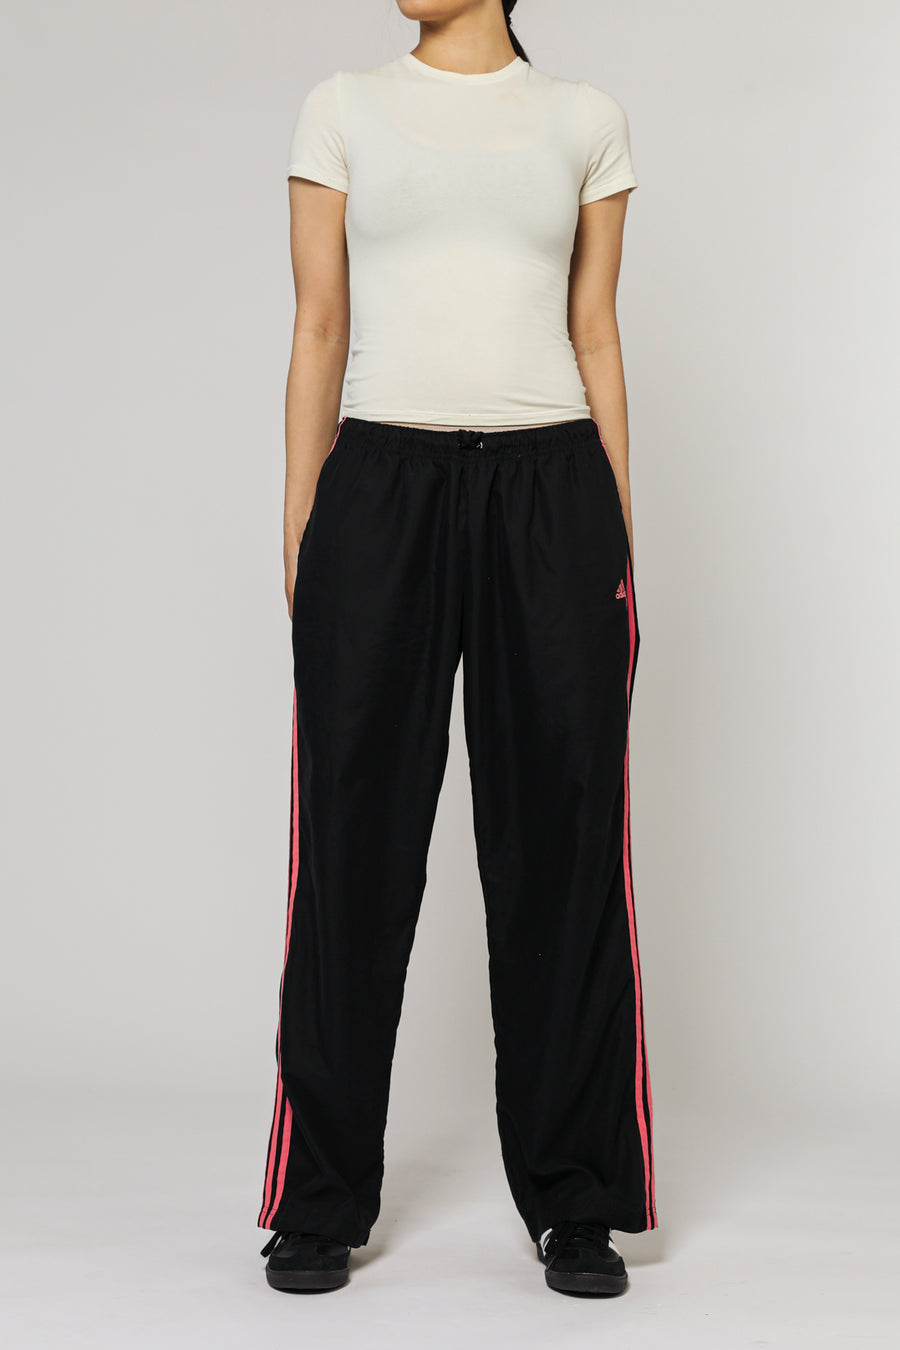 Vintage Adidas Track Pants - XL – Frankie Collective